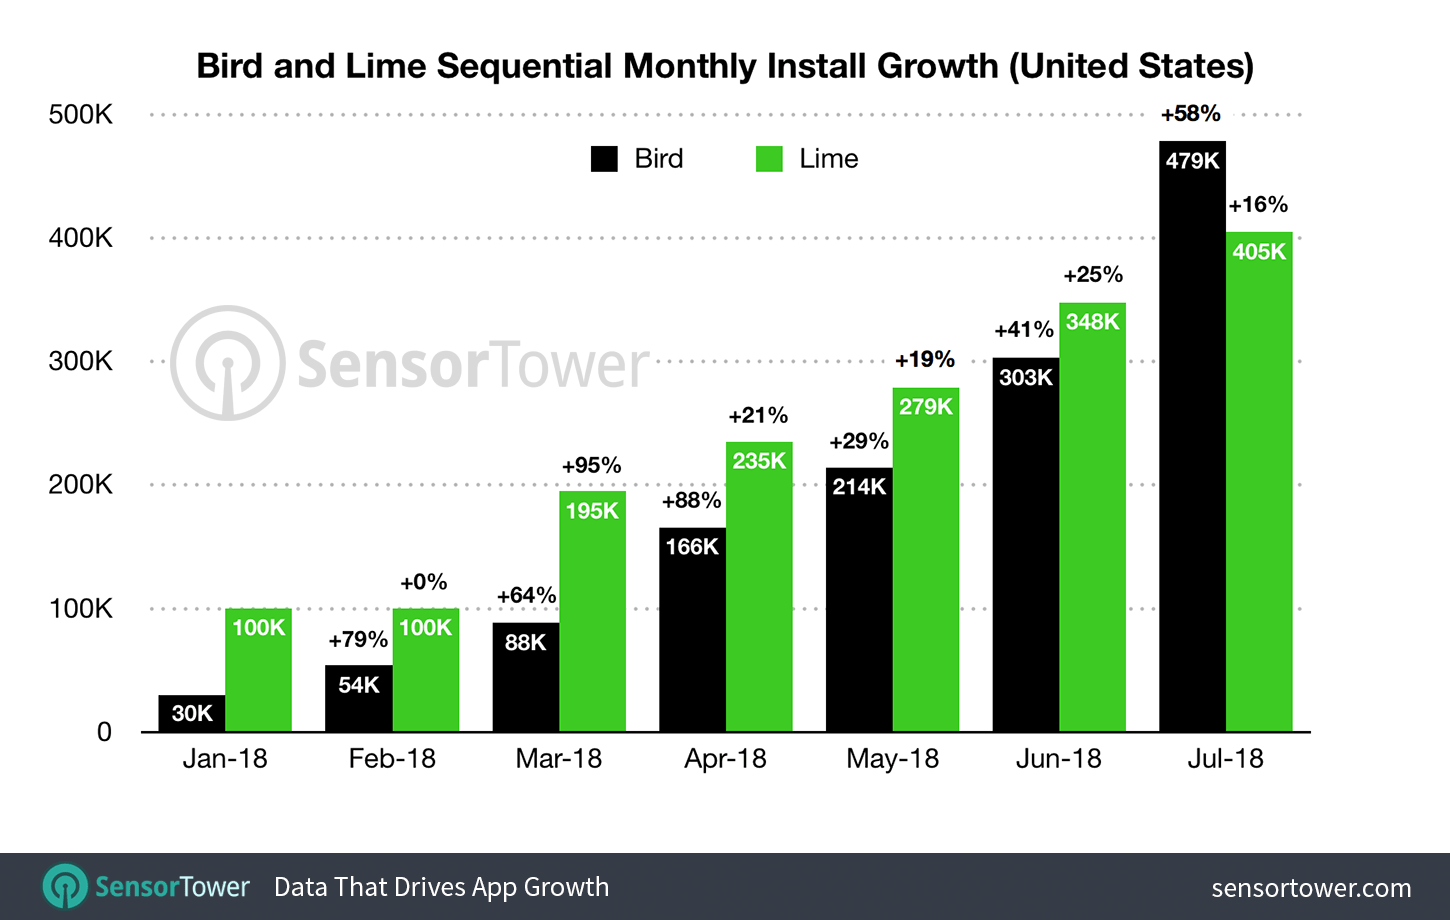 Chart showing sequential monthly growth of top electric scooter apps in the United States for 2018